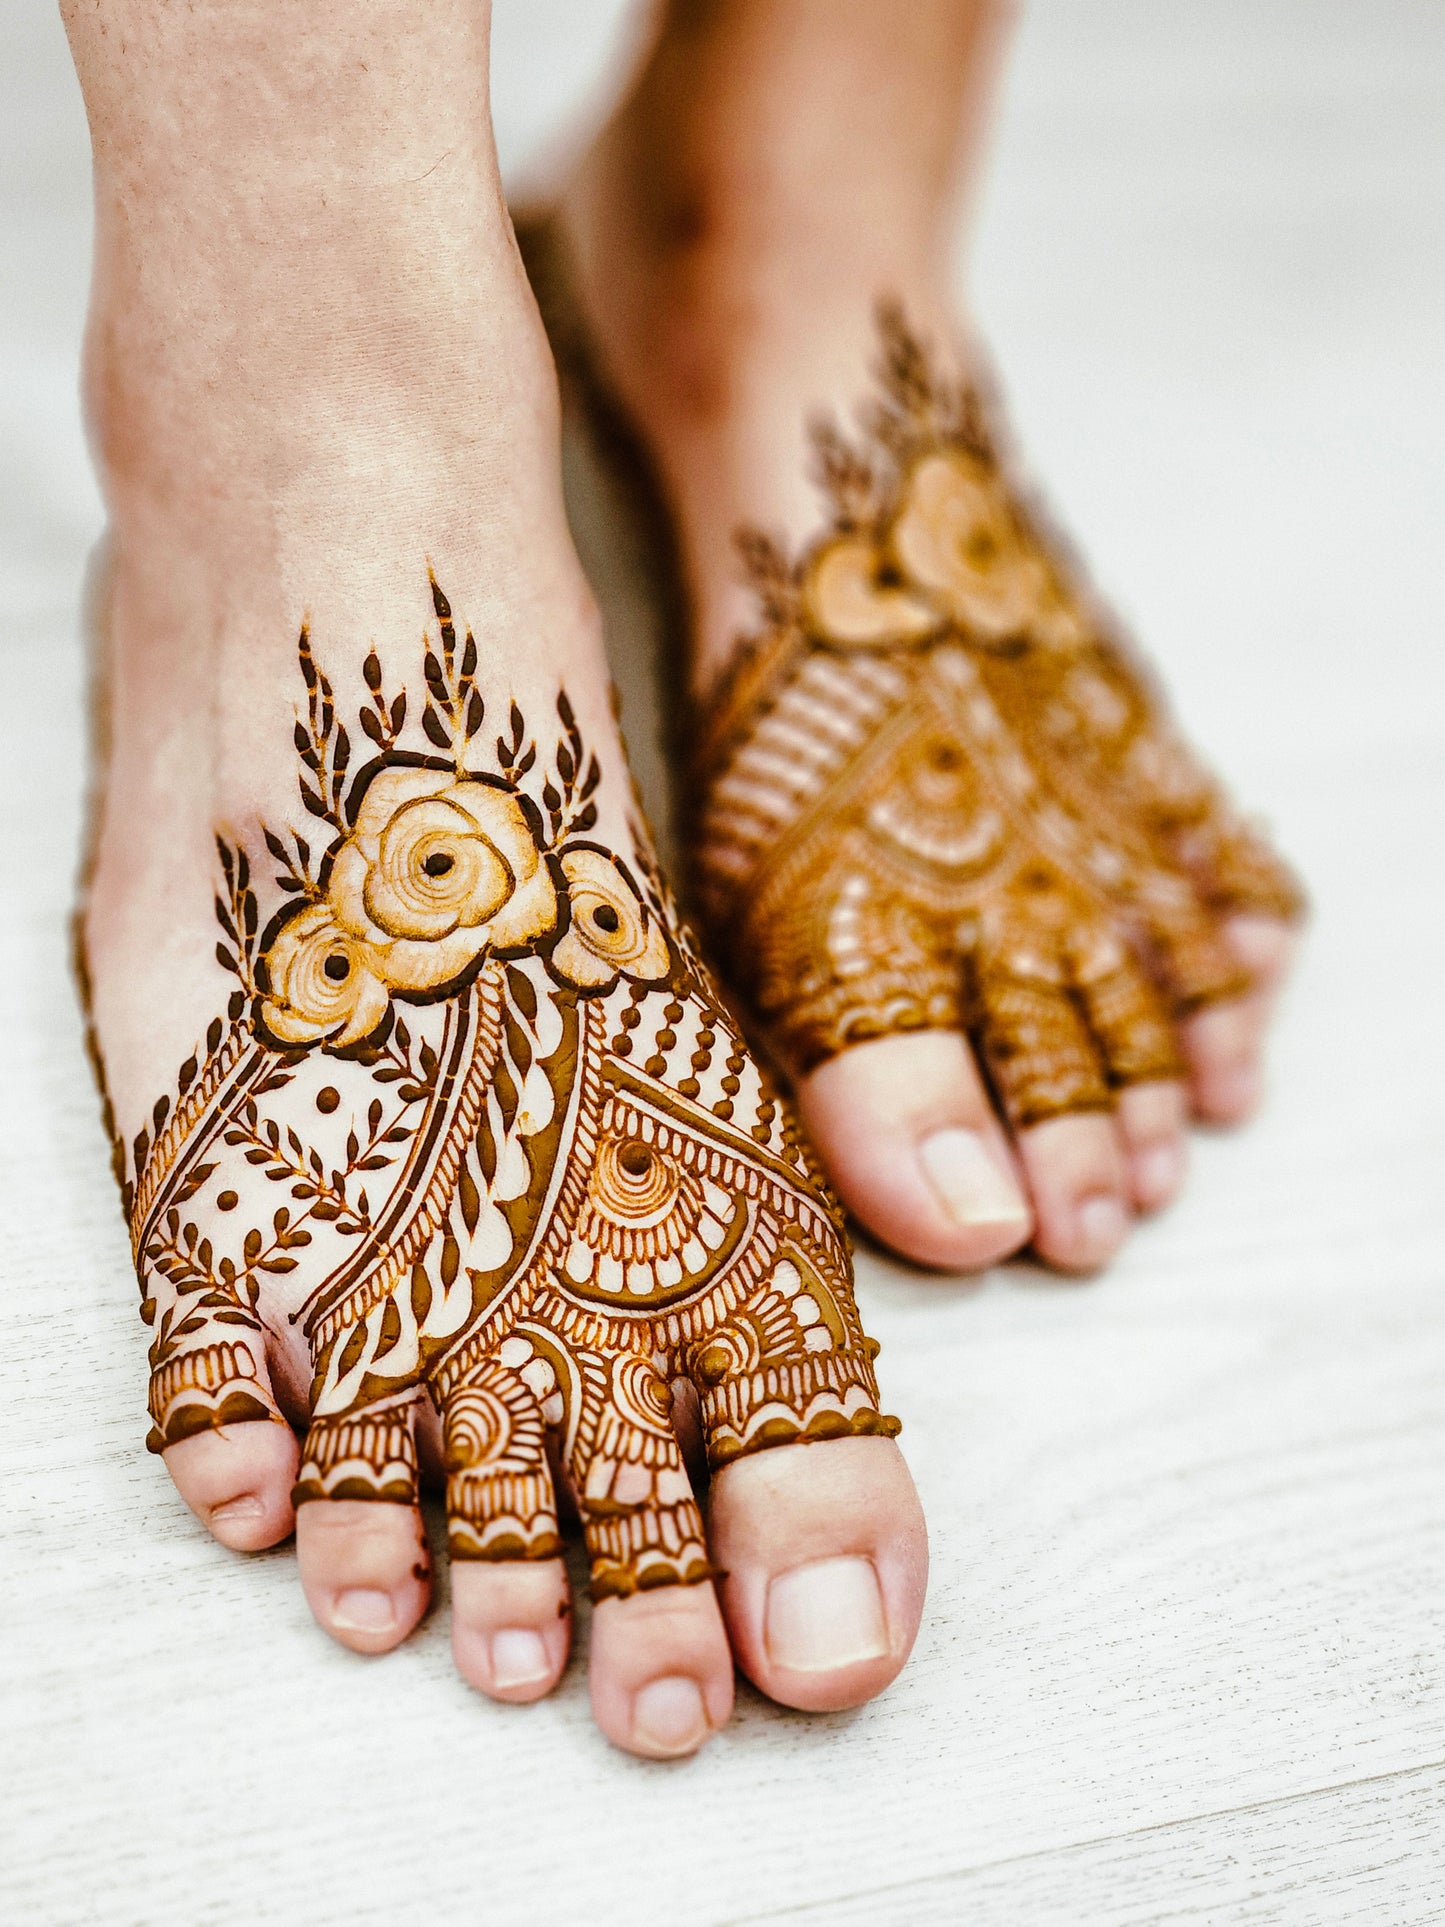 Arm (Hands & Feet) + 2 hours Henna Party $820